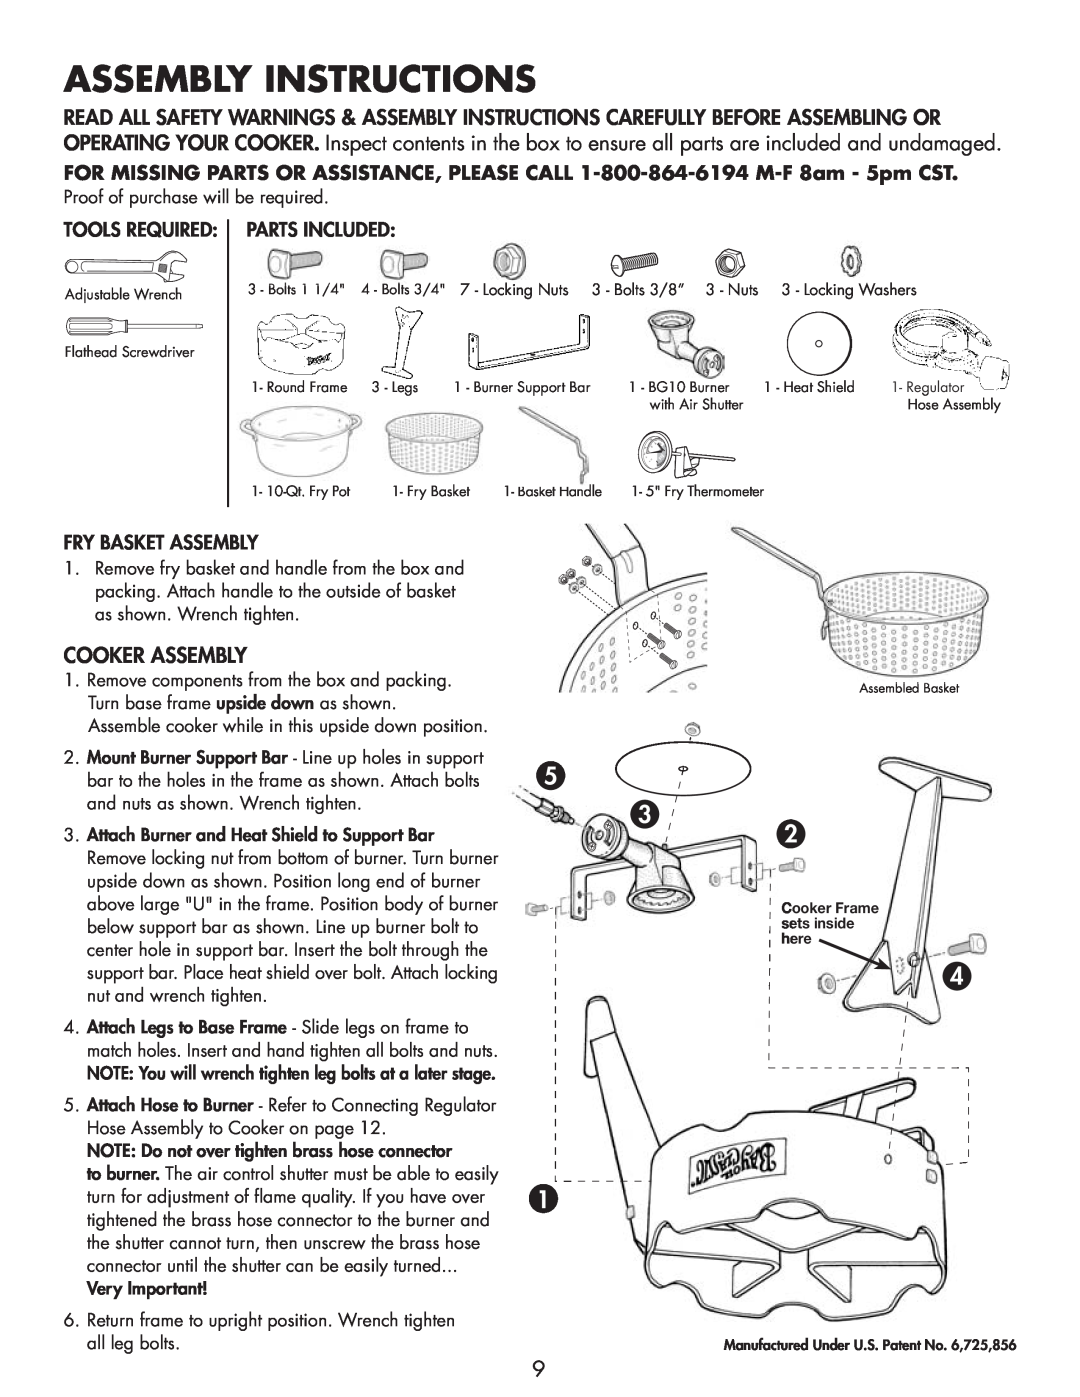 Bayou Classic 2212 owner manual Assembly Instructions, Cooker Assembly 